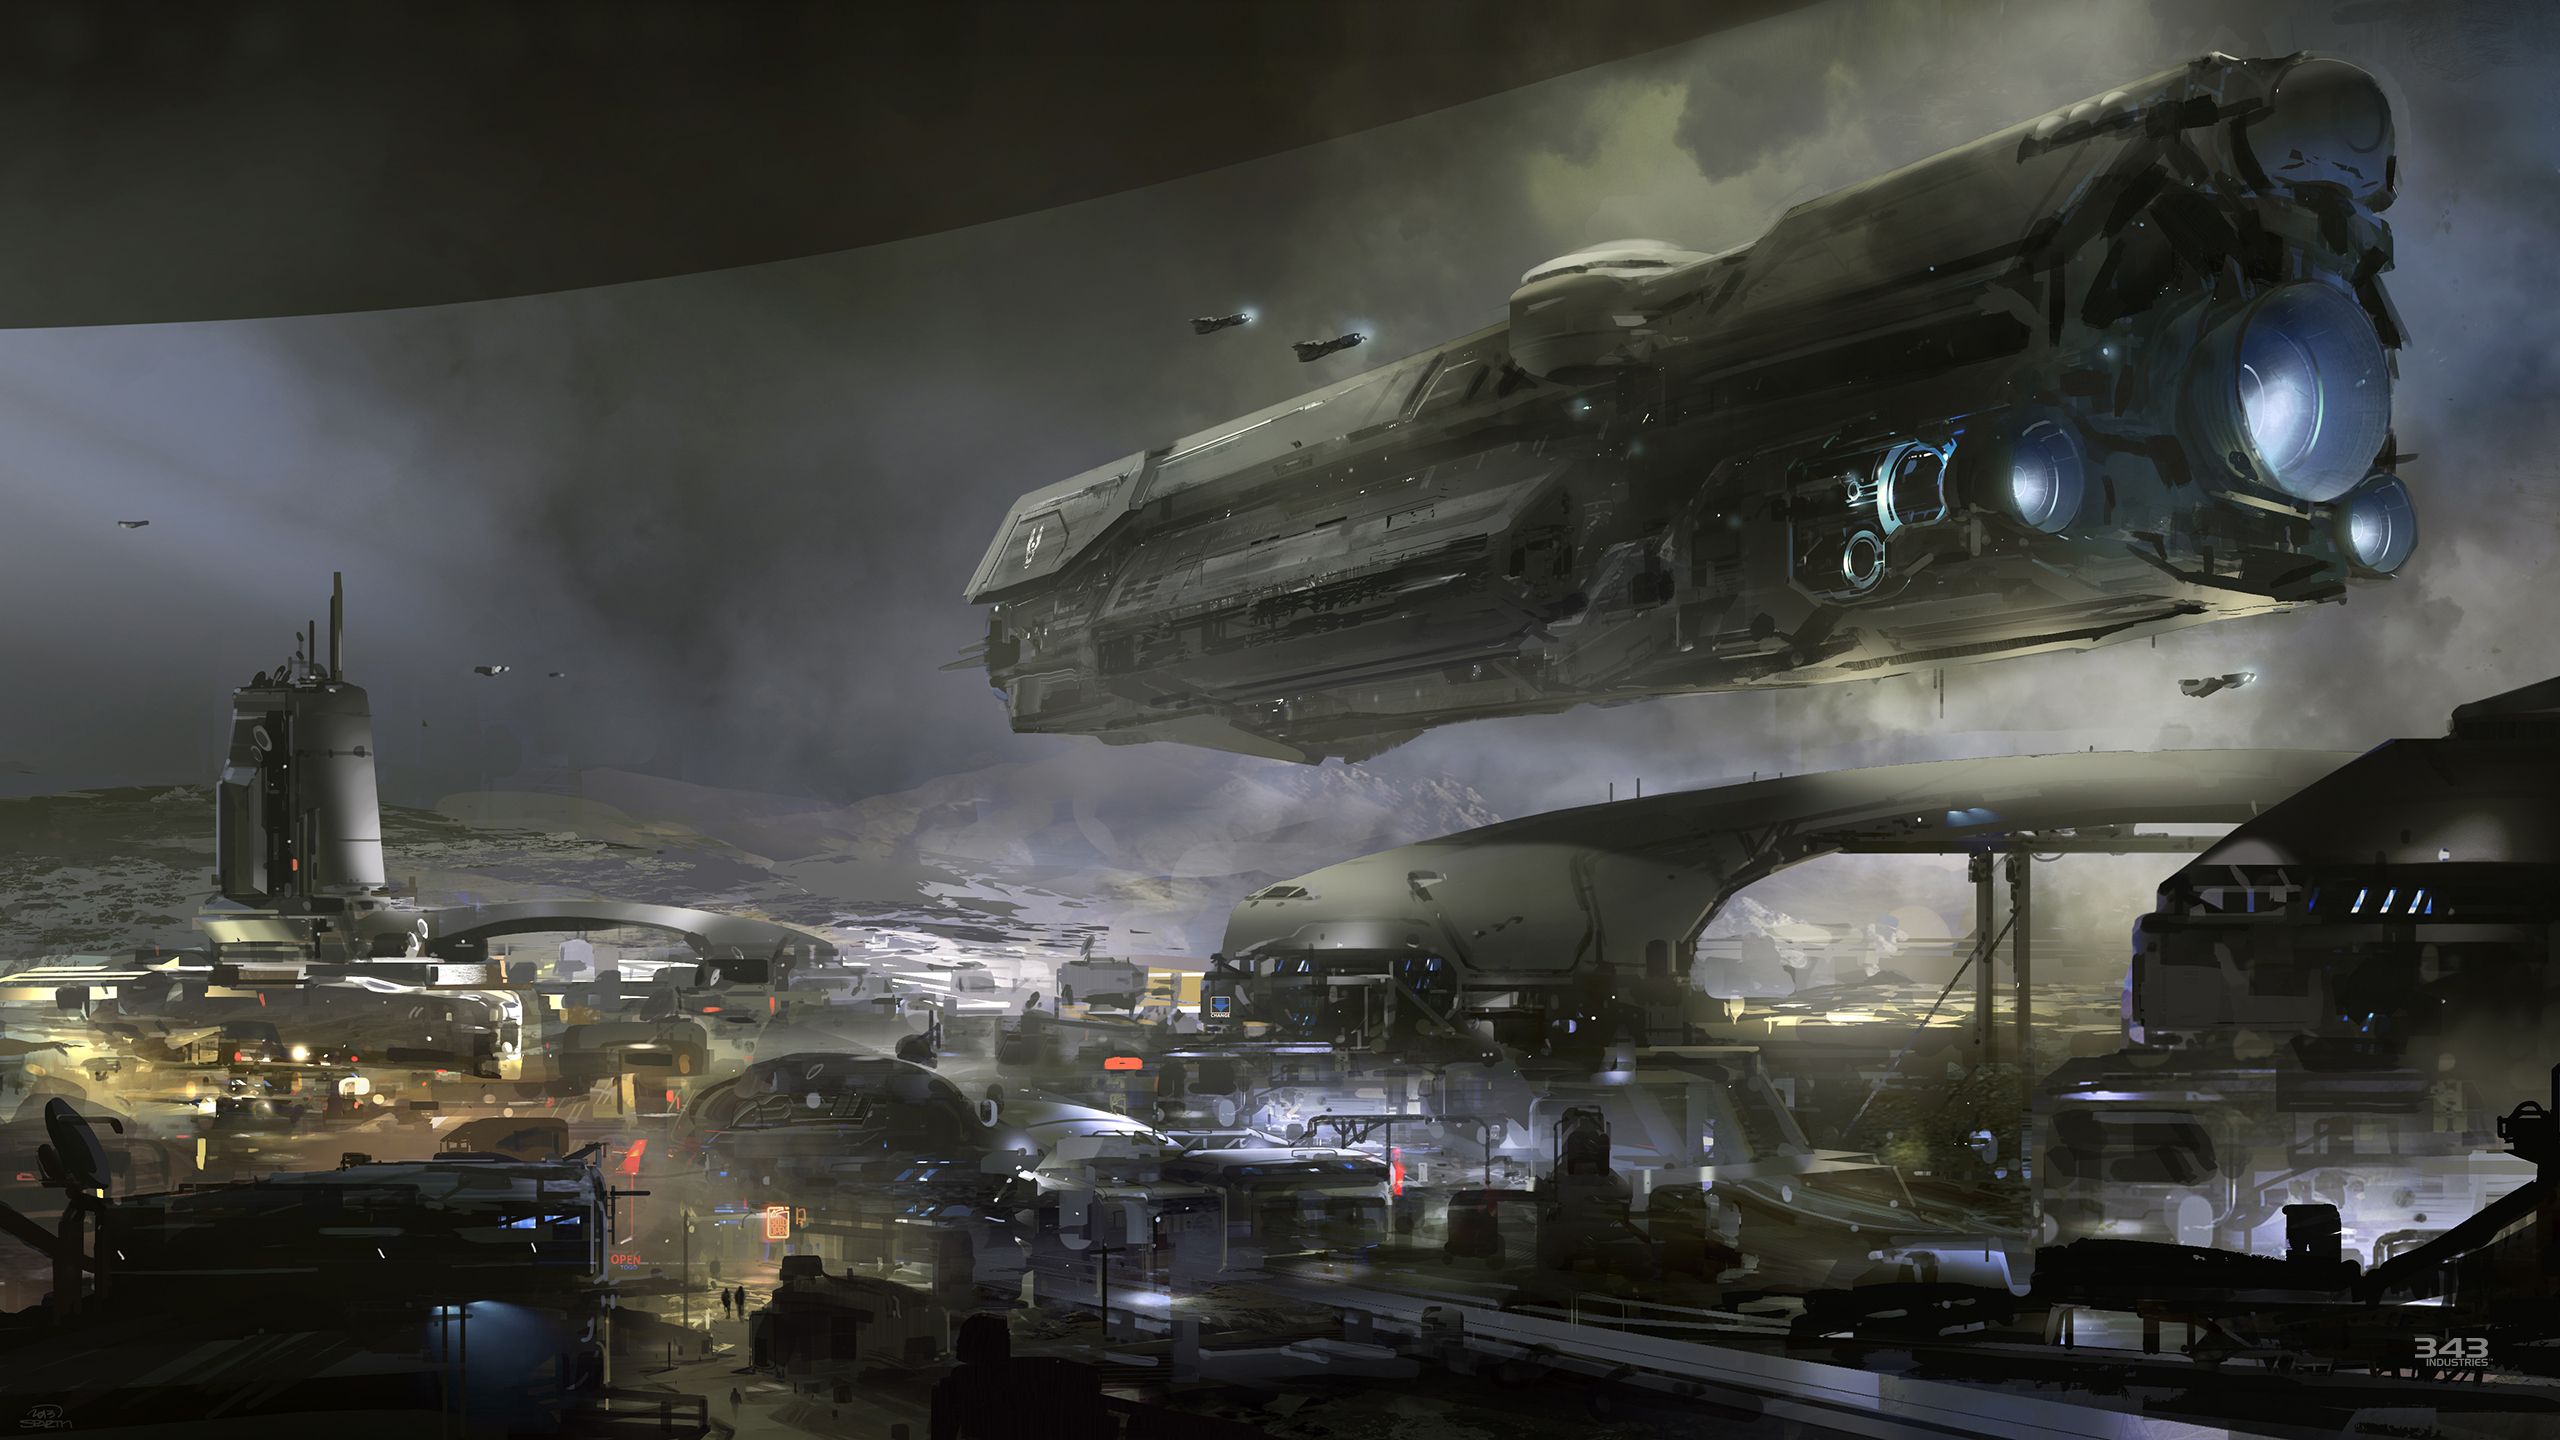 343 Industries has shared a new concept artwork of the new Halo game